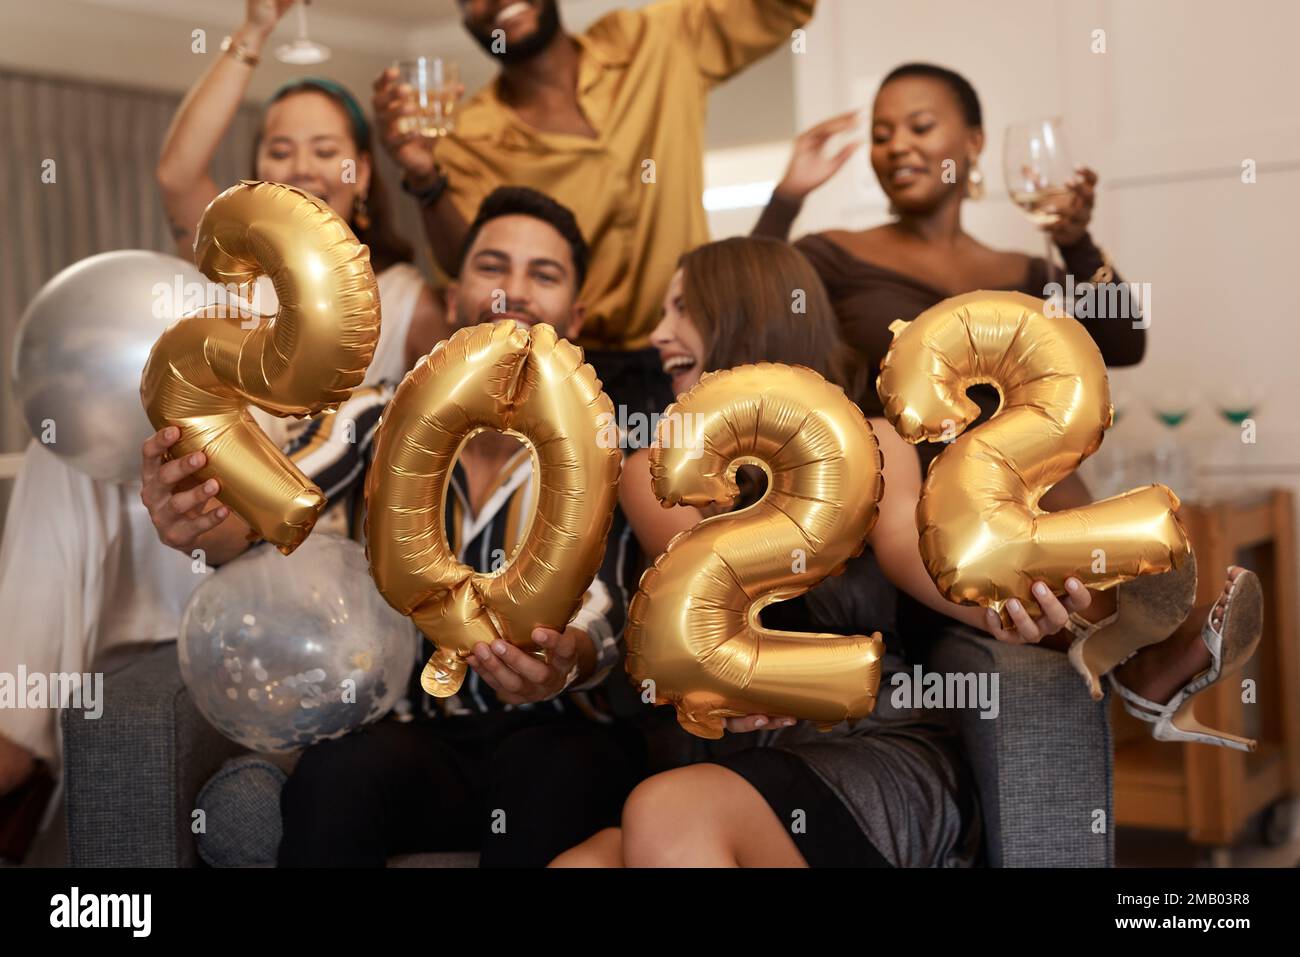 Happy 2022. a diverse group of friends standing together and holding up 2022 balloons during a New Years party. Stock Photo